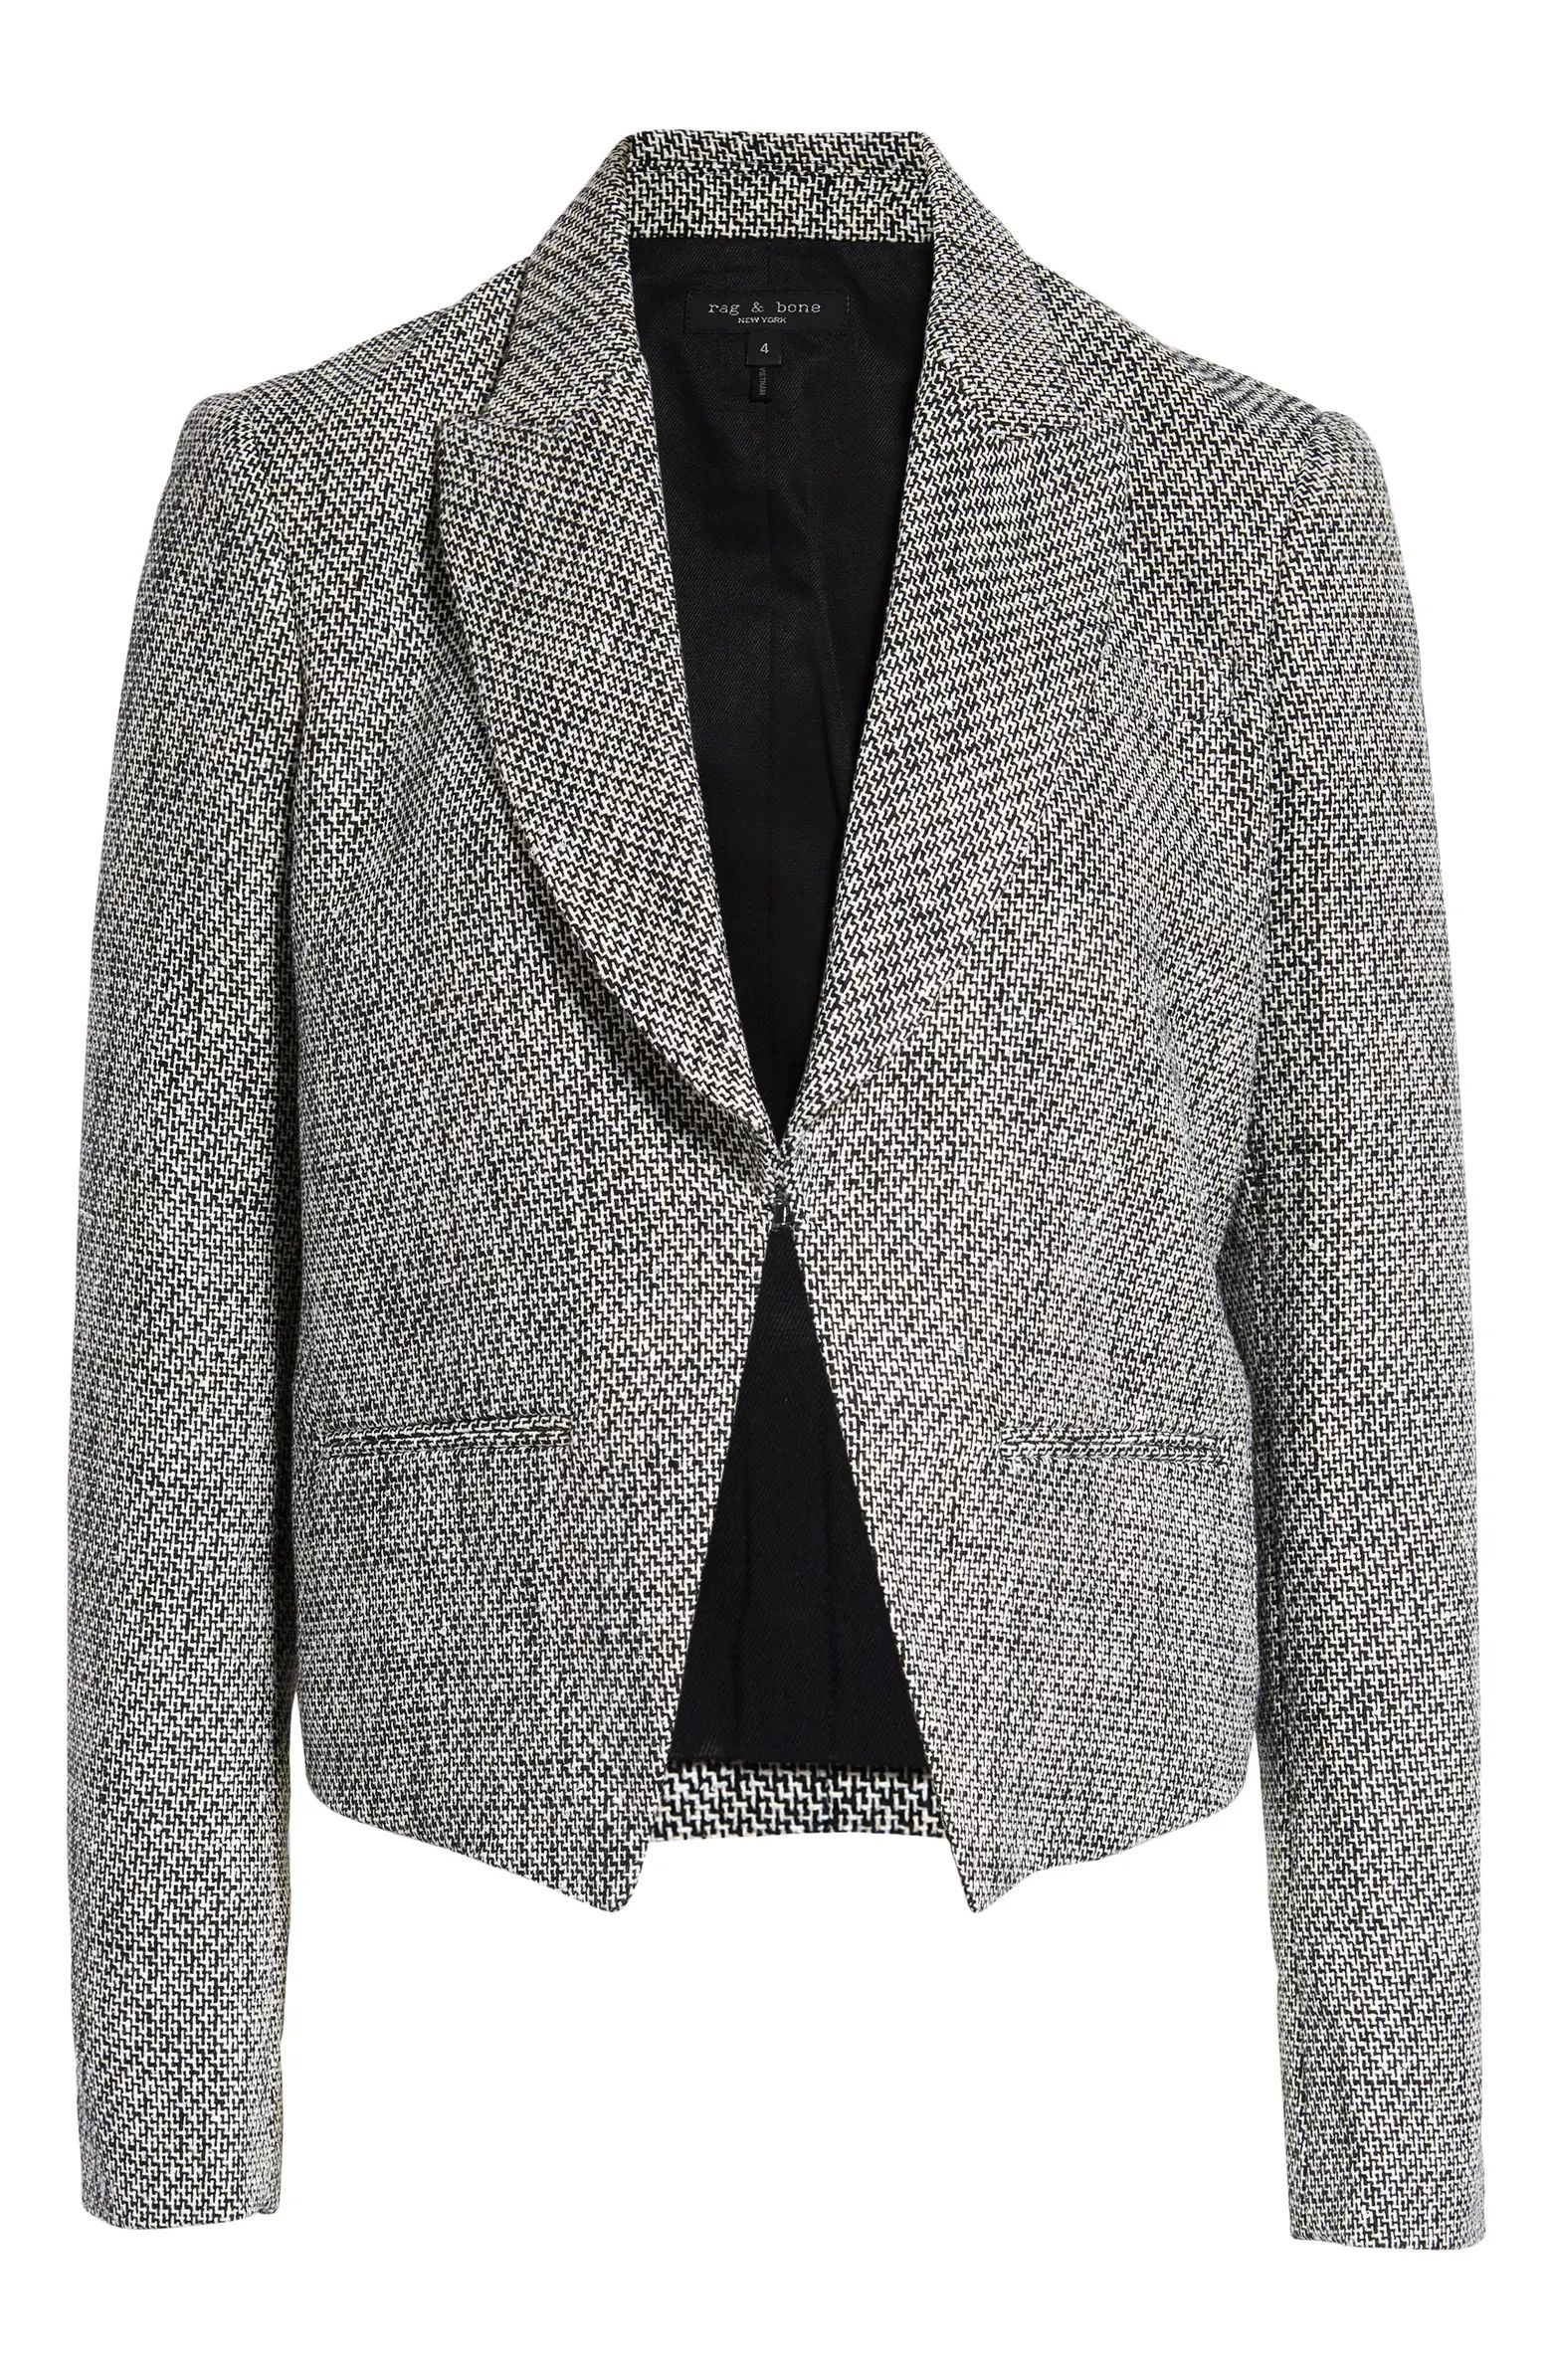 Size InfoIf between sizes, order one size down.Details & CareTactile tweed brings polish to this ... | Nordstrom